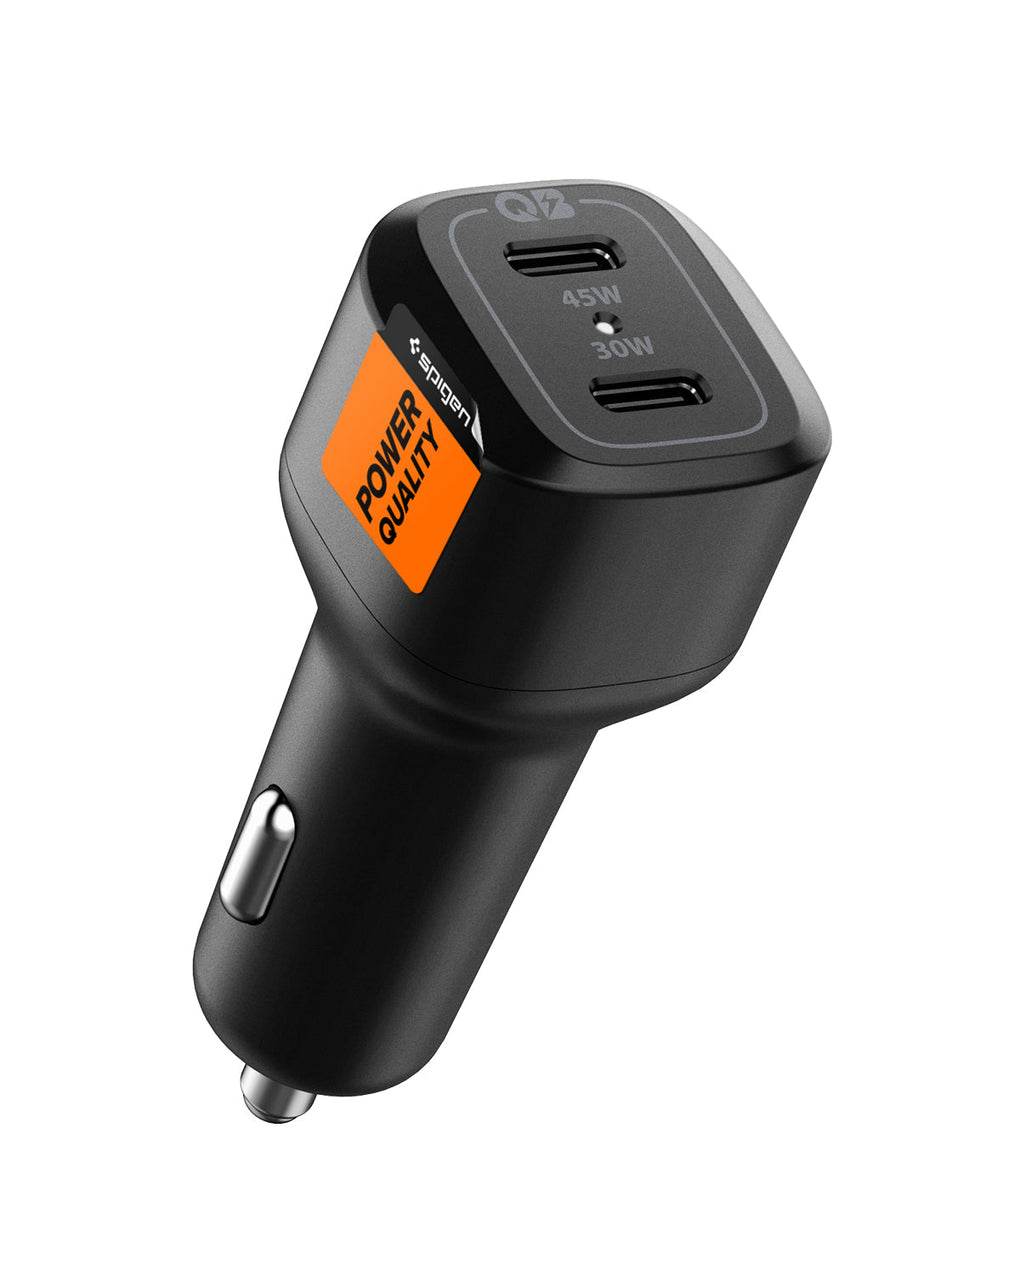 Car Charger Arc.SA in black showing the front and bottom